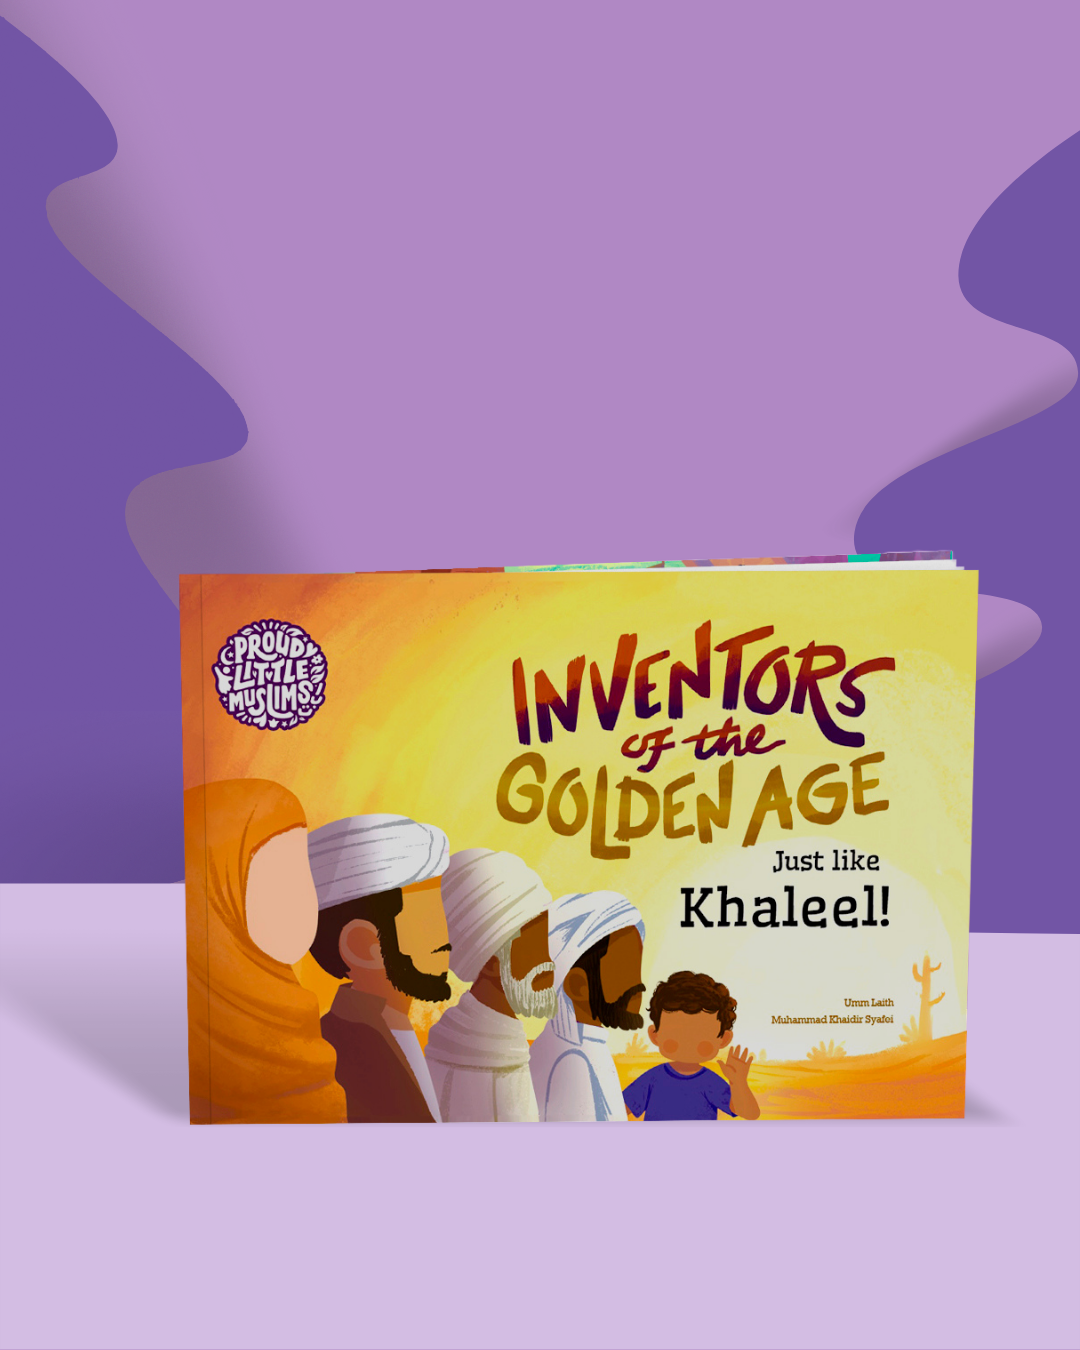 A Personalised Muslim Children's book by Proud Little Muslims about the Islamic Golden Age called Inventors of the Golden Age: Just like you!